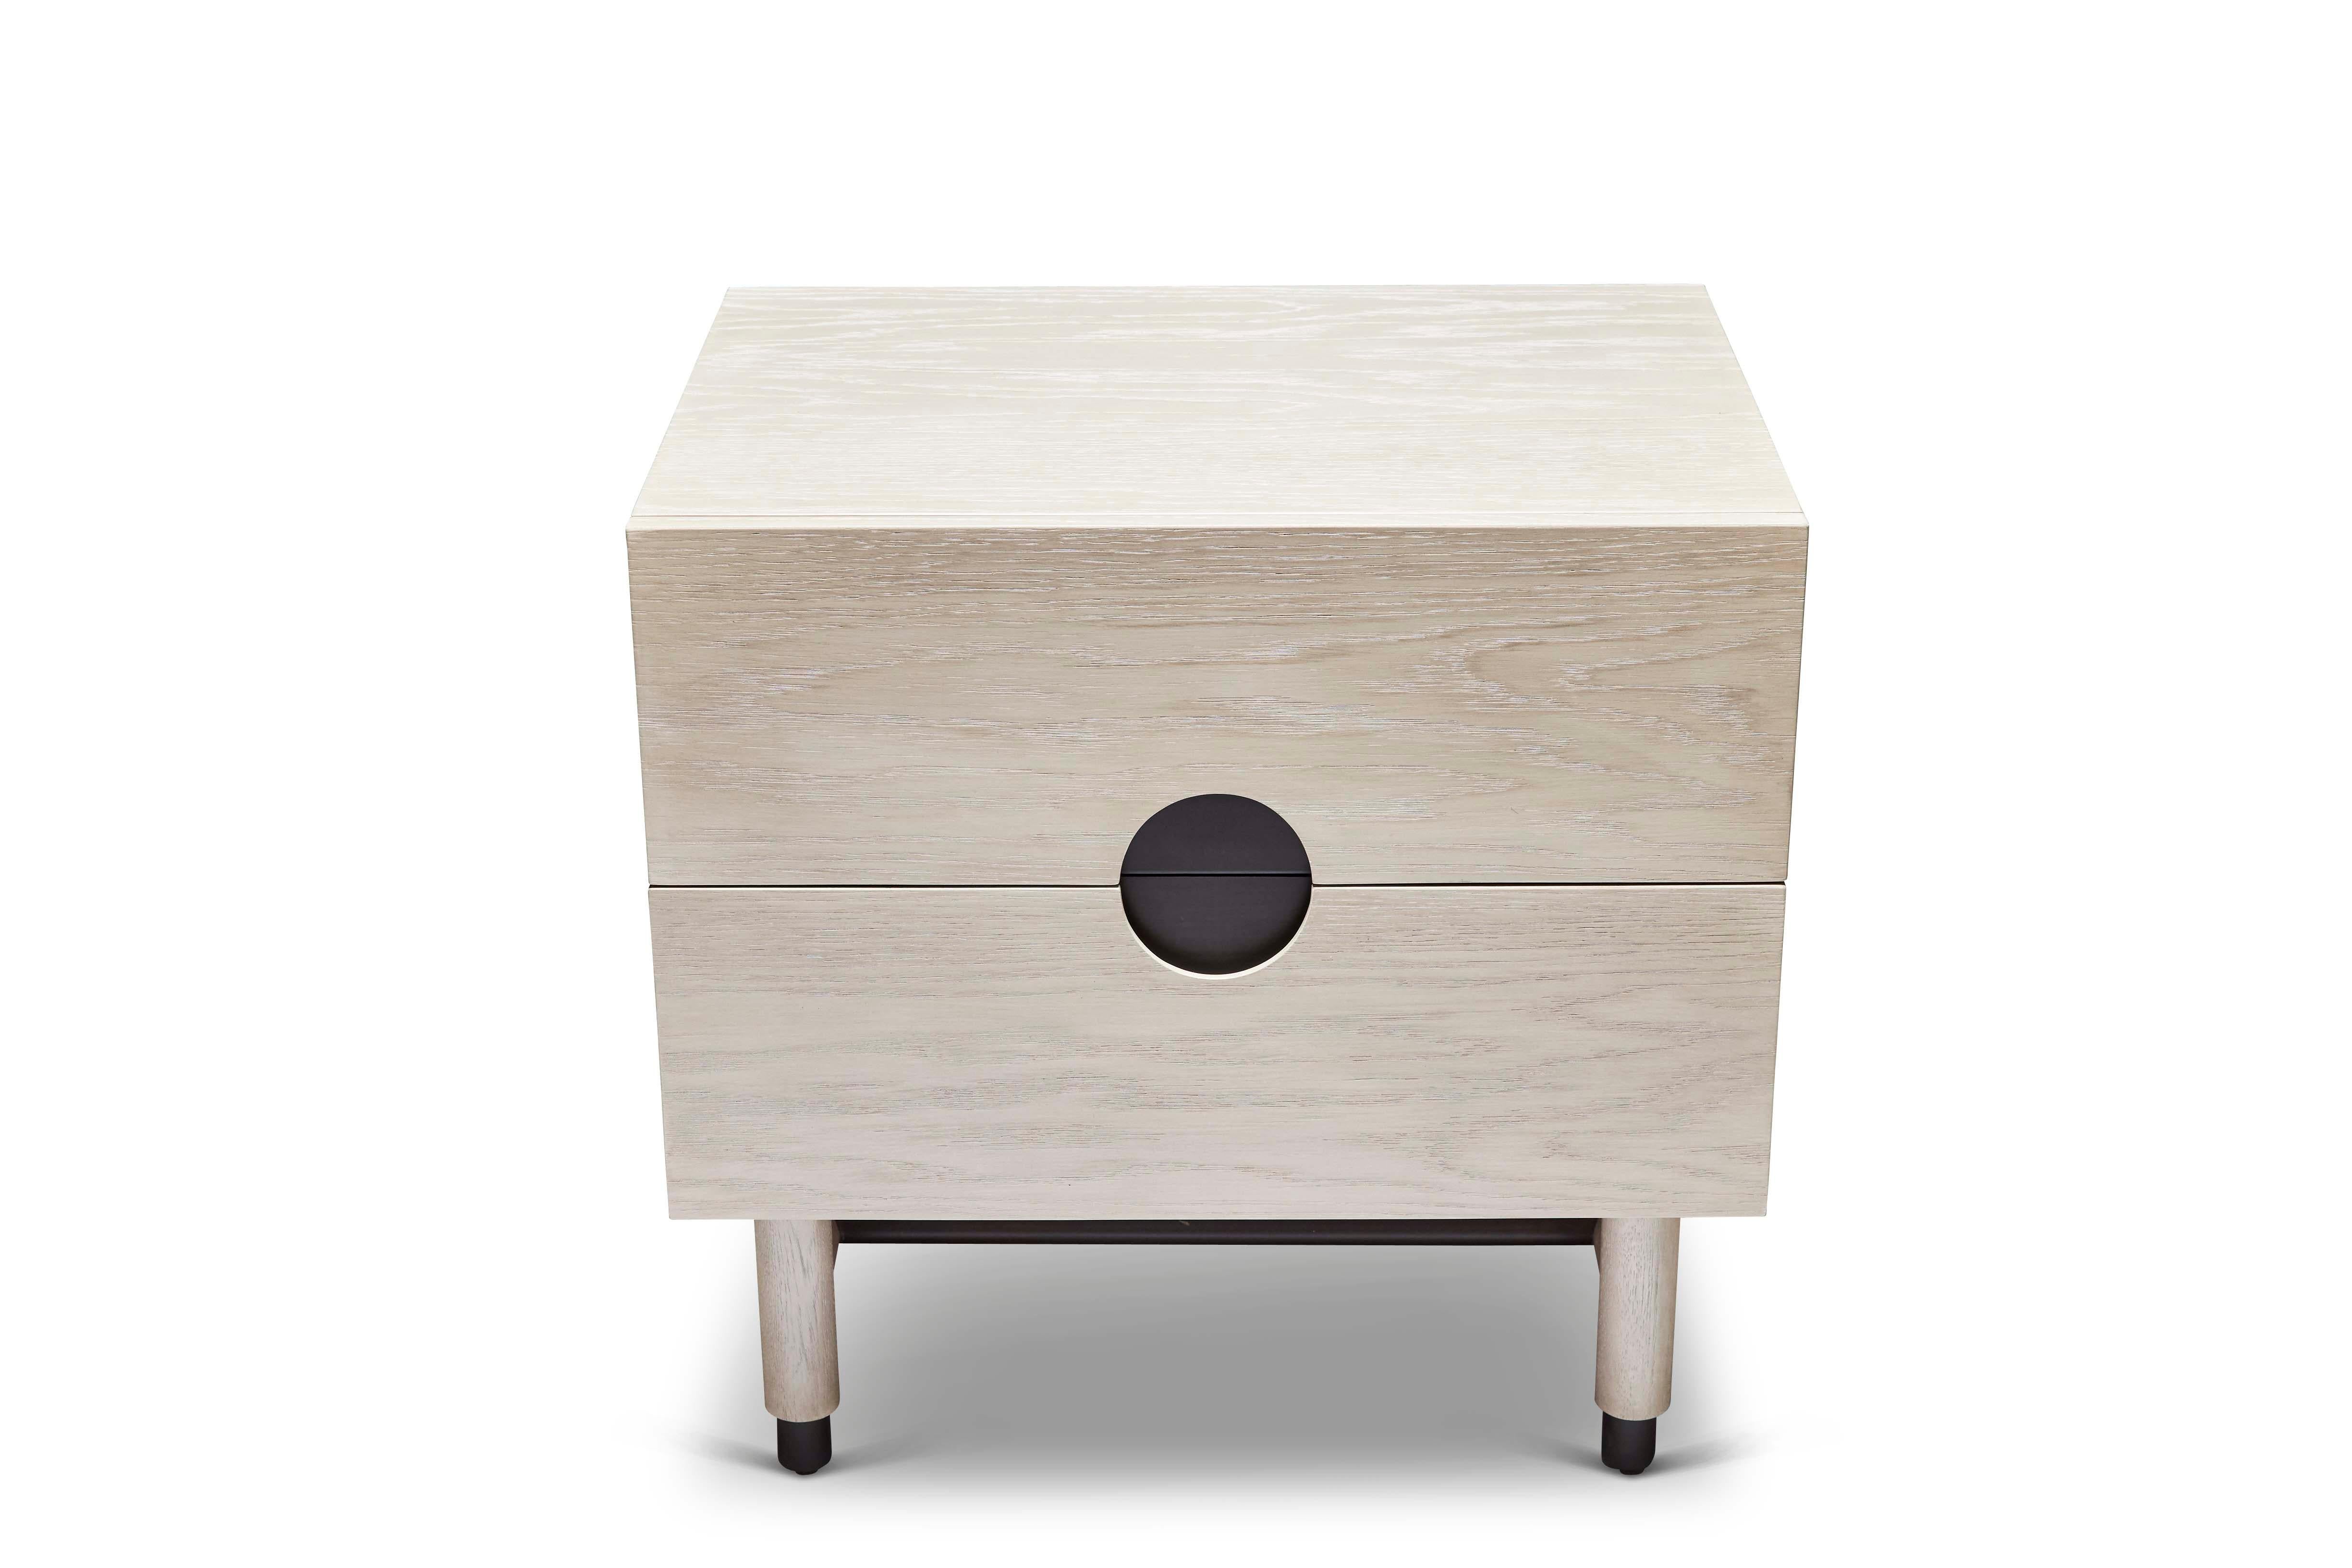 The Niguel nightstand features two drawers. Details include leveling brass CAP feet, a brass stretcher on the base, lacquered interior and inset brass hardware. 

The Lawson-Fenning Collection is designed and handmade in Los Angeles, California.